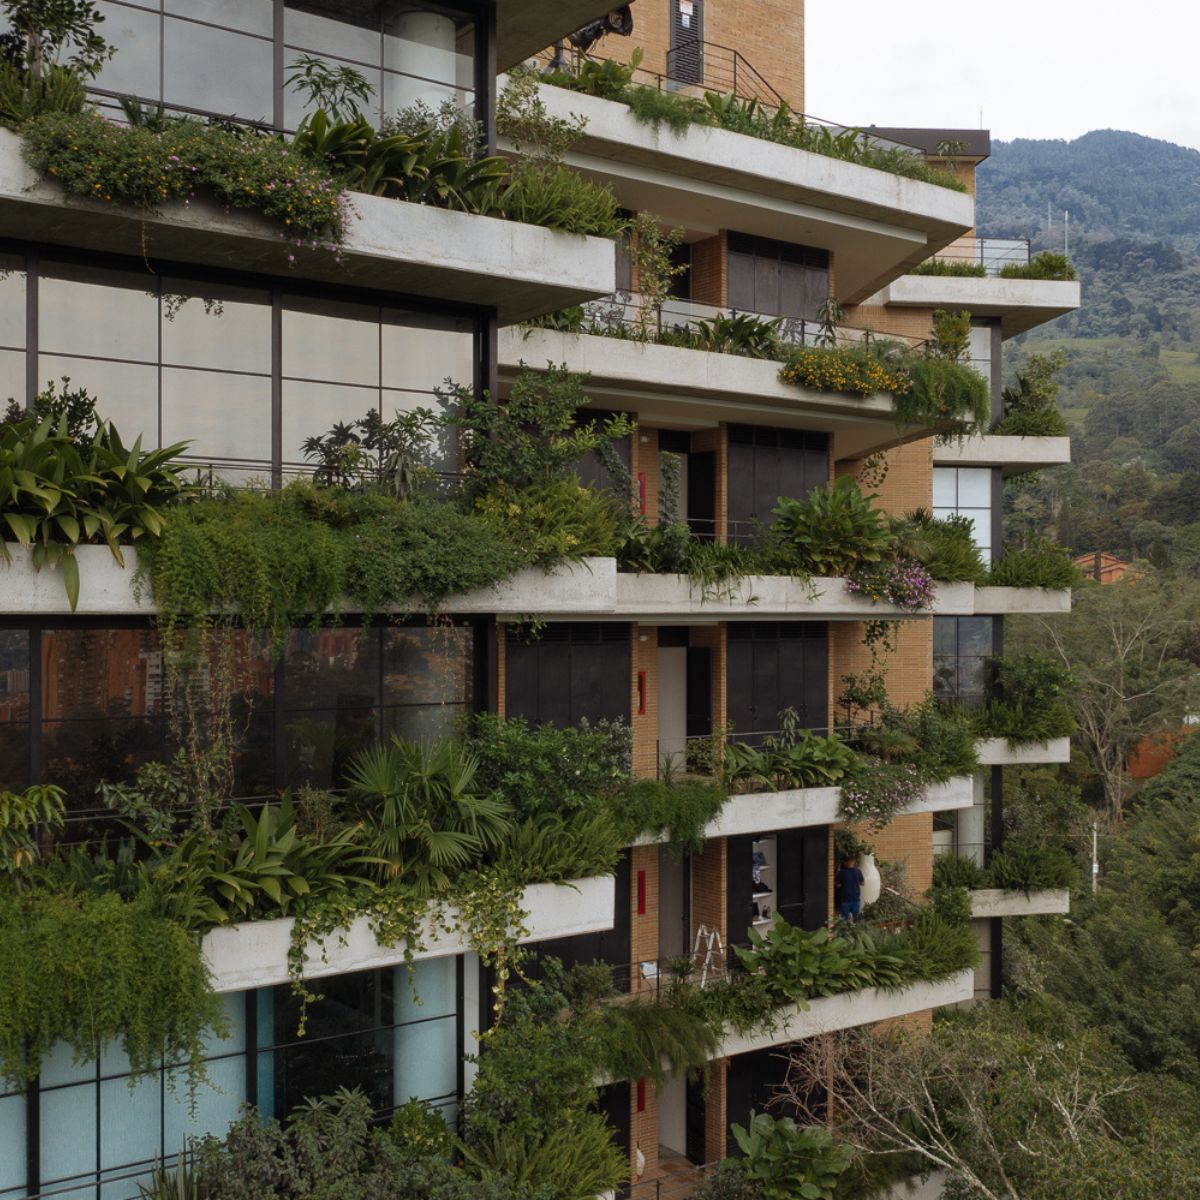 Medellin is the new green Colombian city featured on Thursd